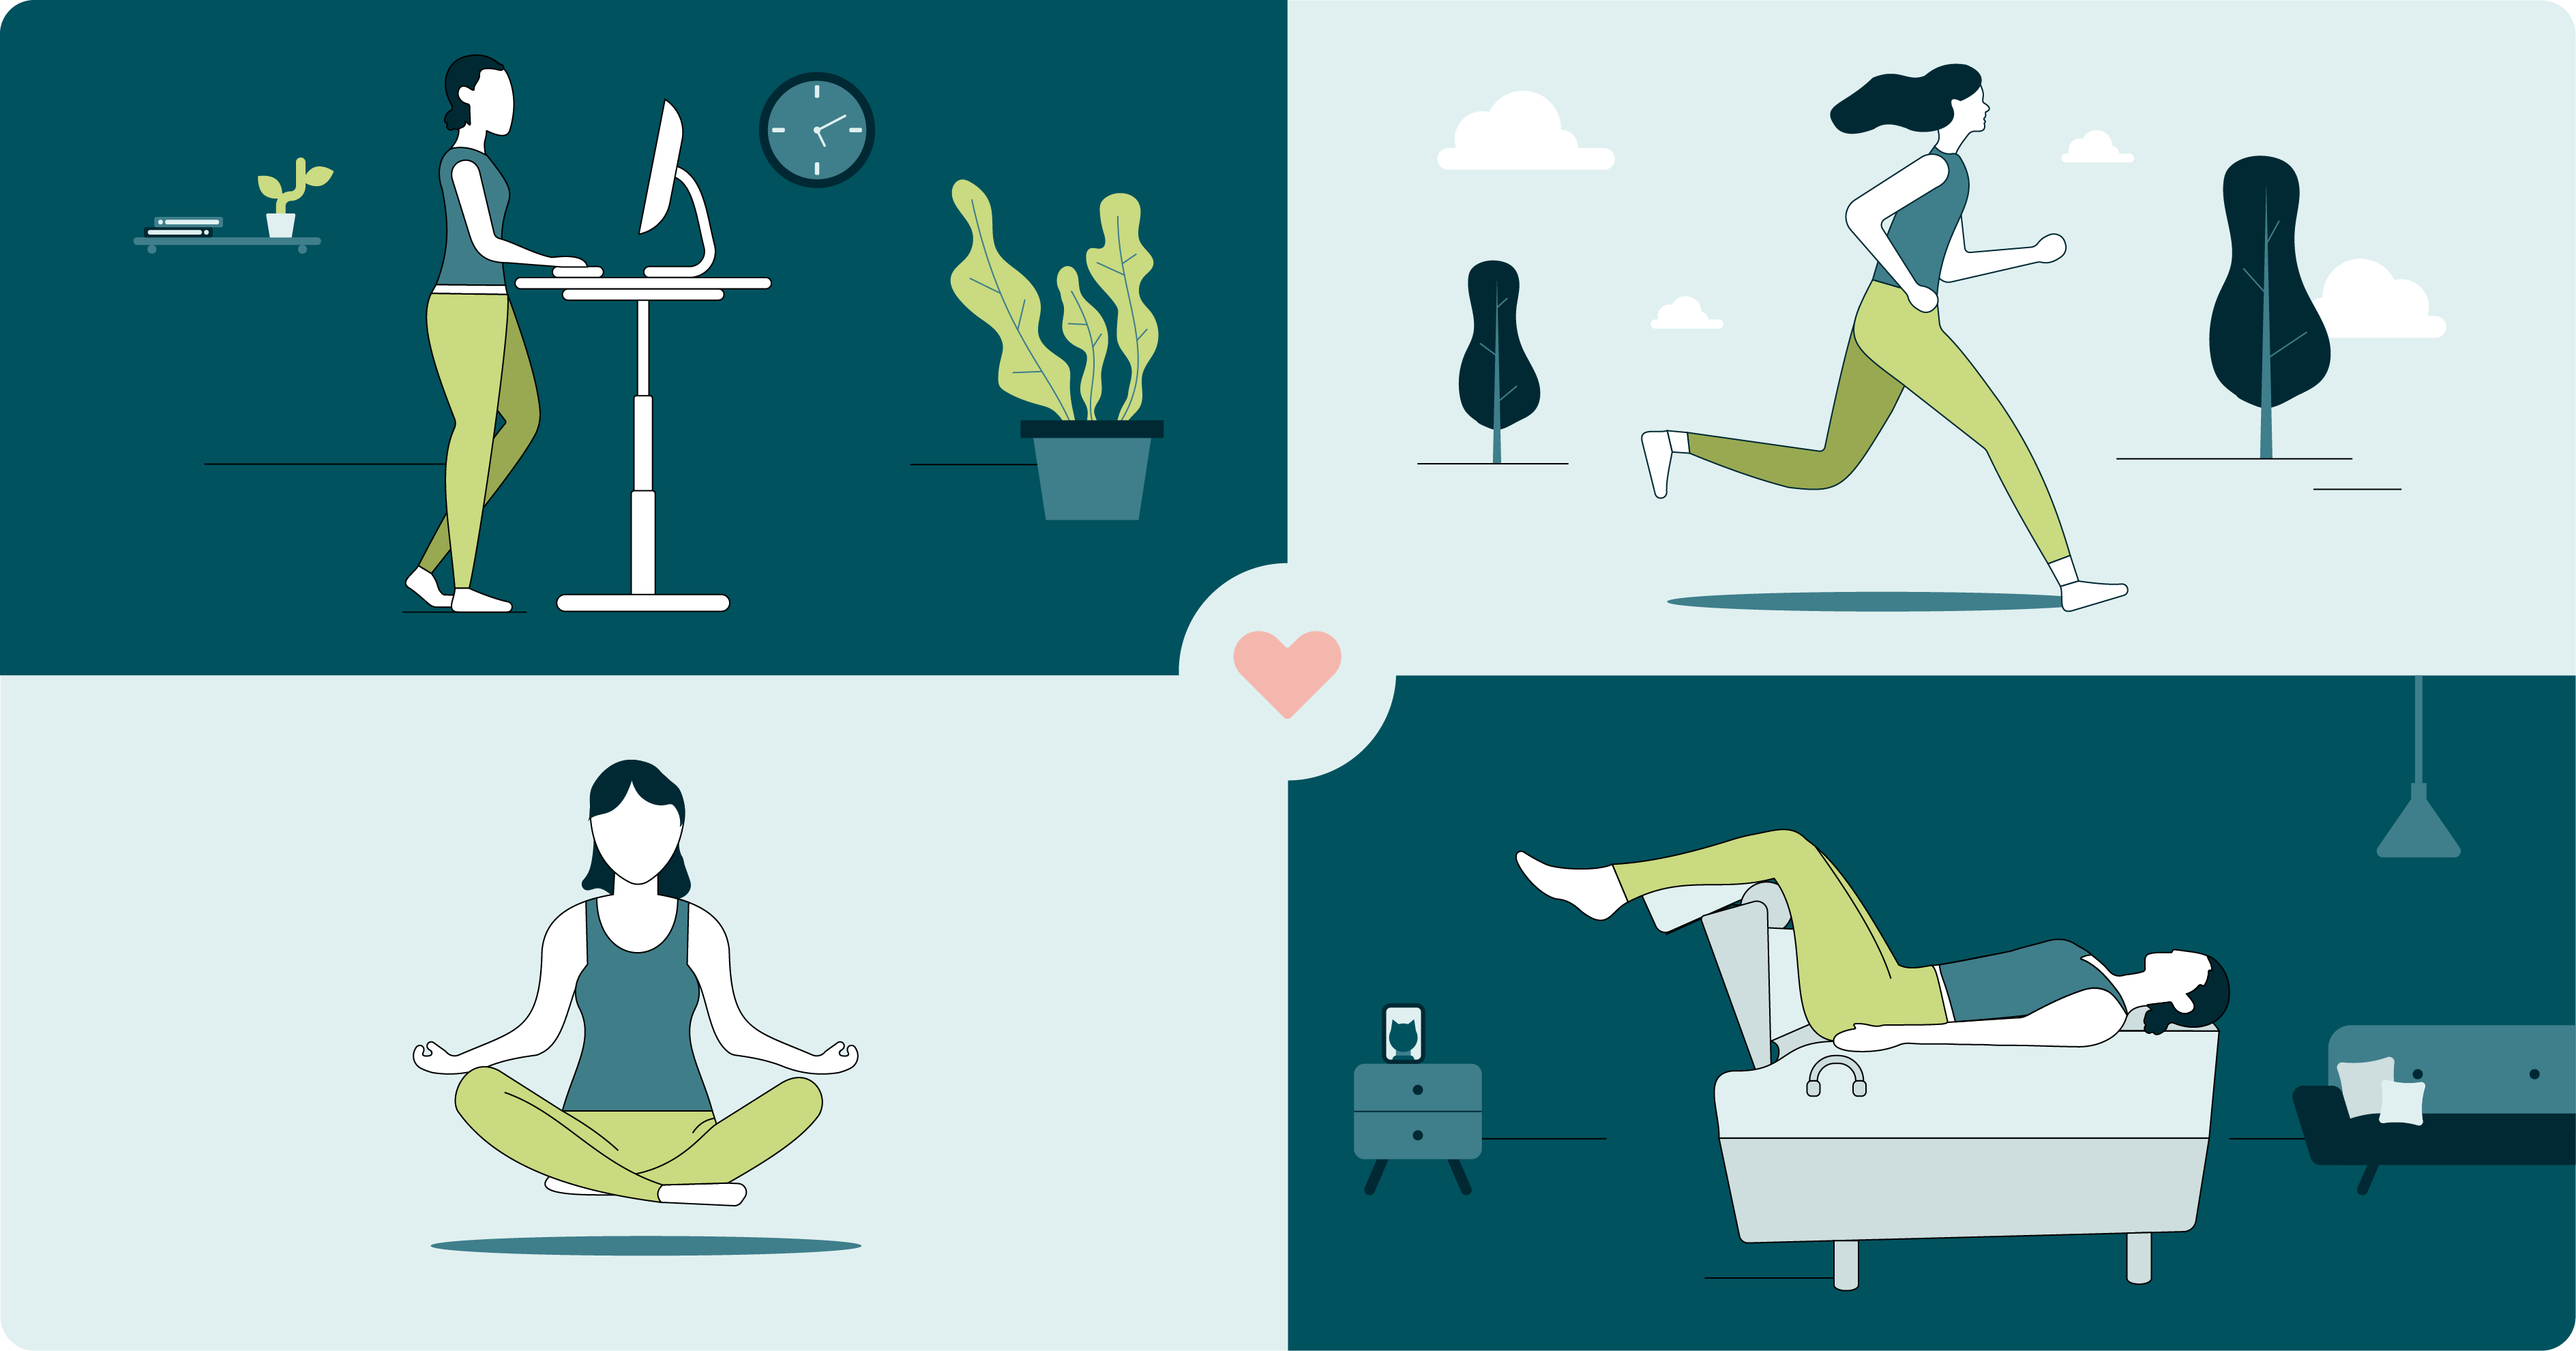 Illustration with 4 sections that show a person stood at a desk, a person running, a person meditating and a person relaxing on backhug